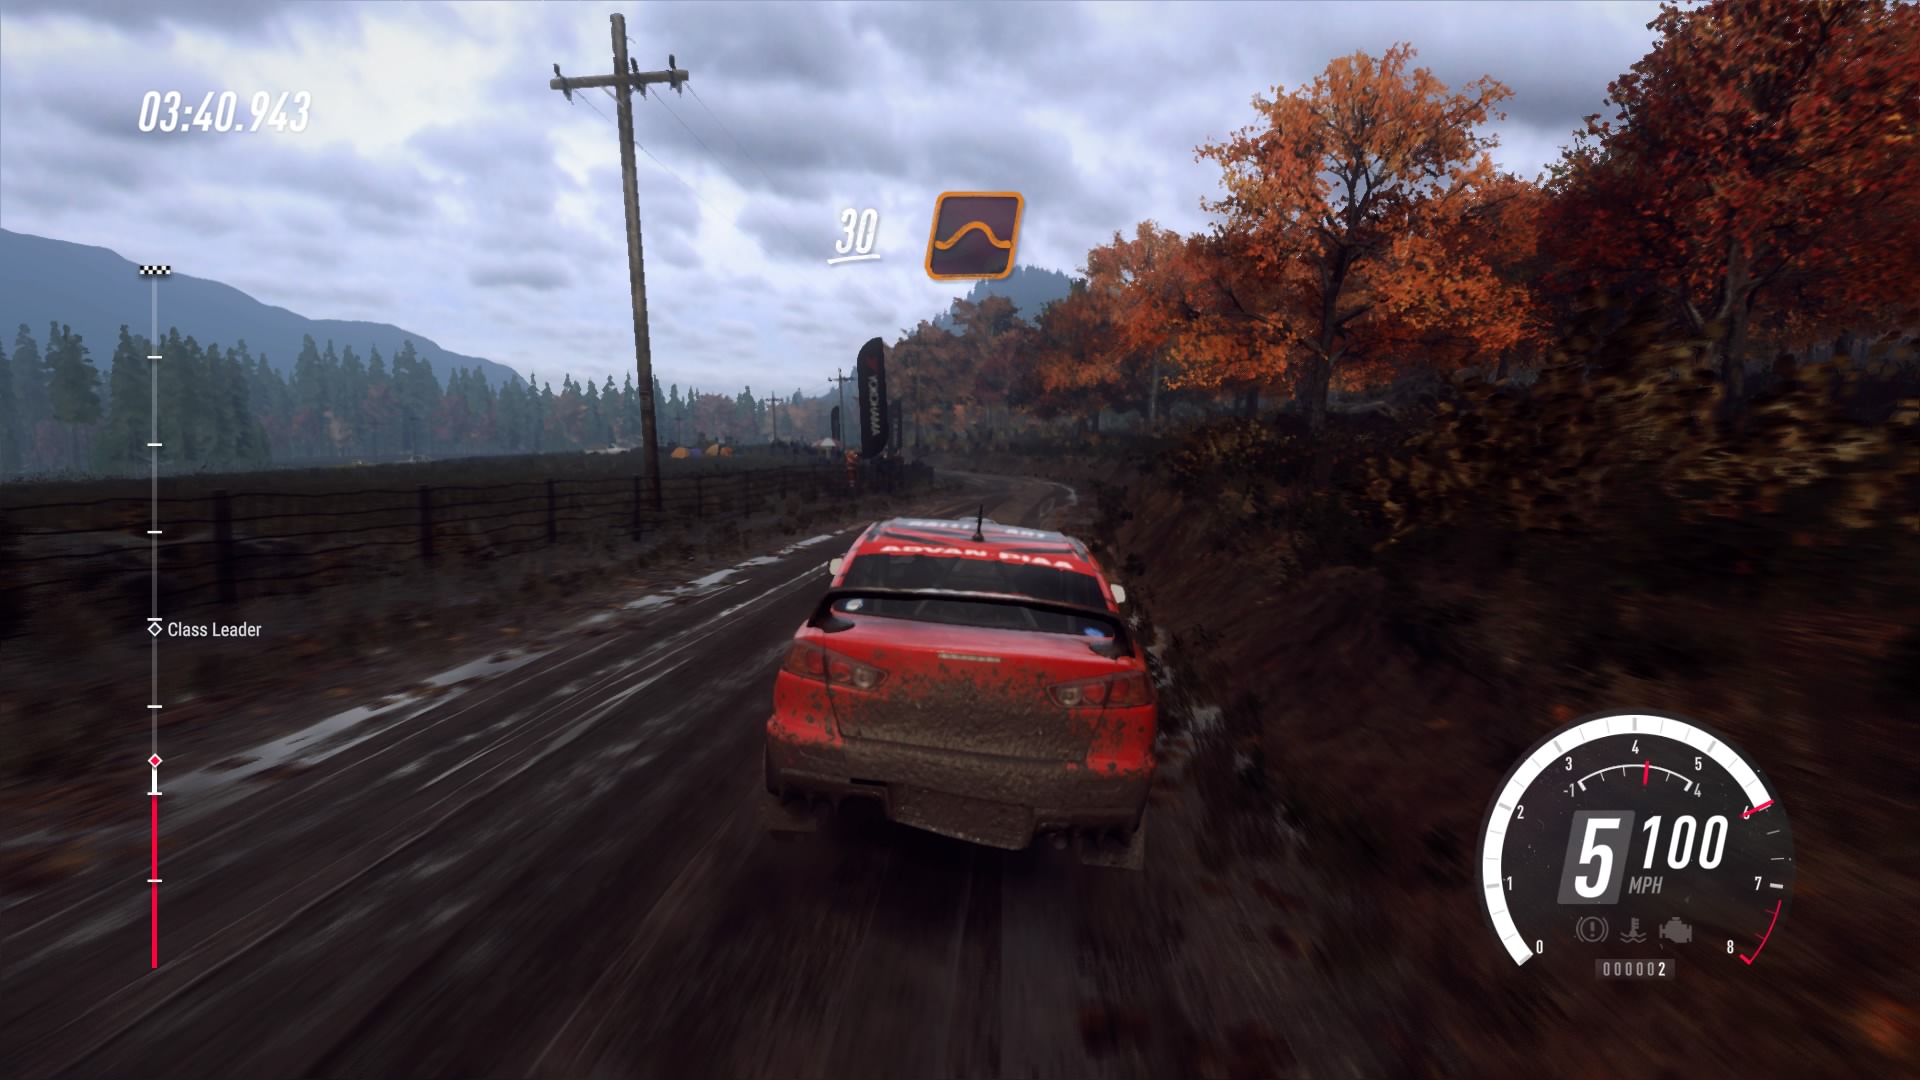 https://www.playstationcountry.com/wp-content/uploads/2019/02/DiRT-Rally-2_0_20190226202707.jpg